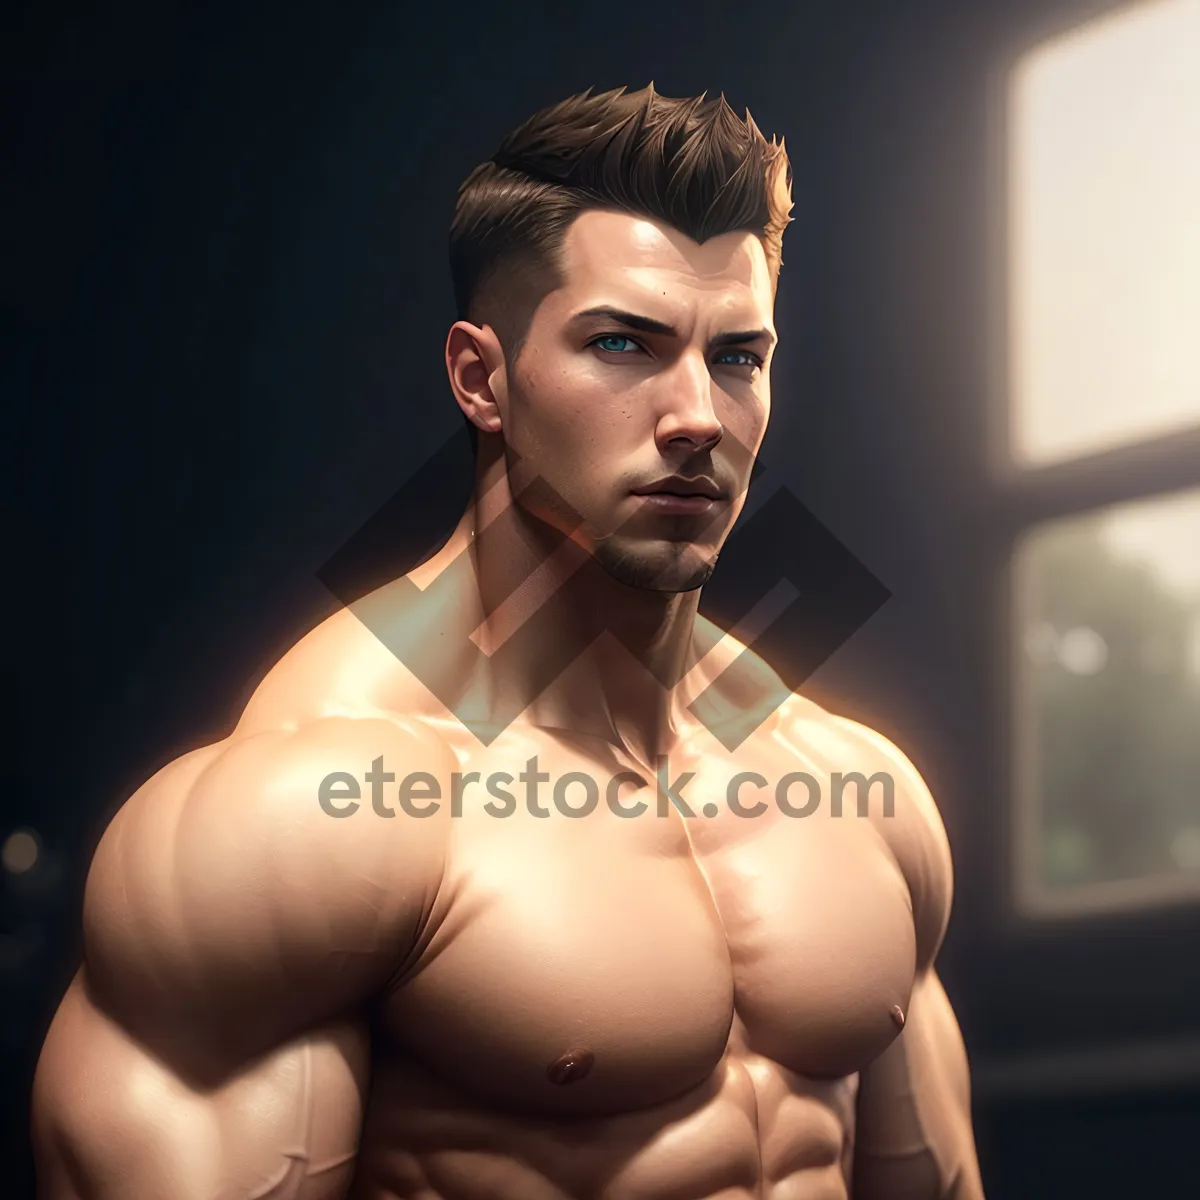 Picture of Muscular Sensuality: The Fit Male Exudes Erotic Energy